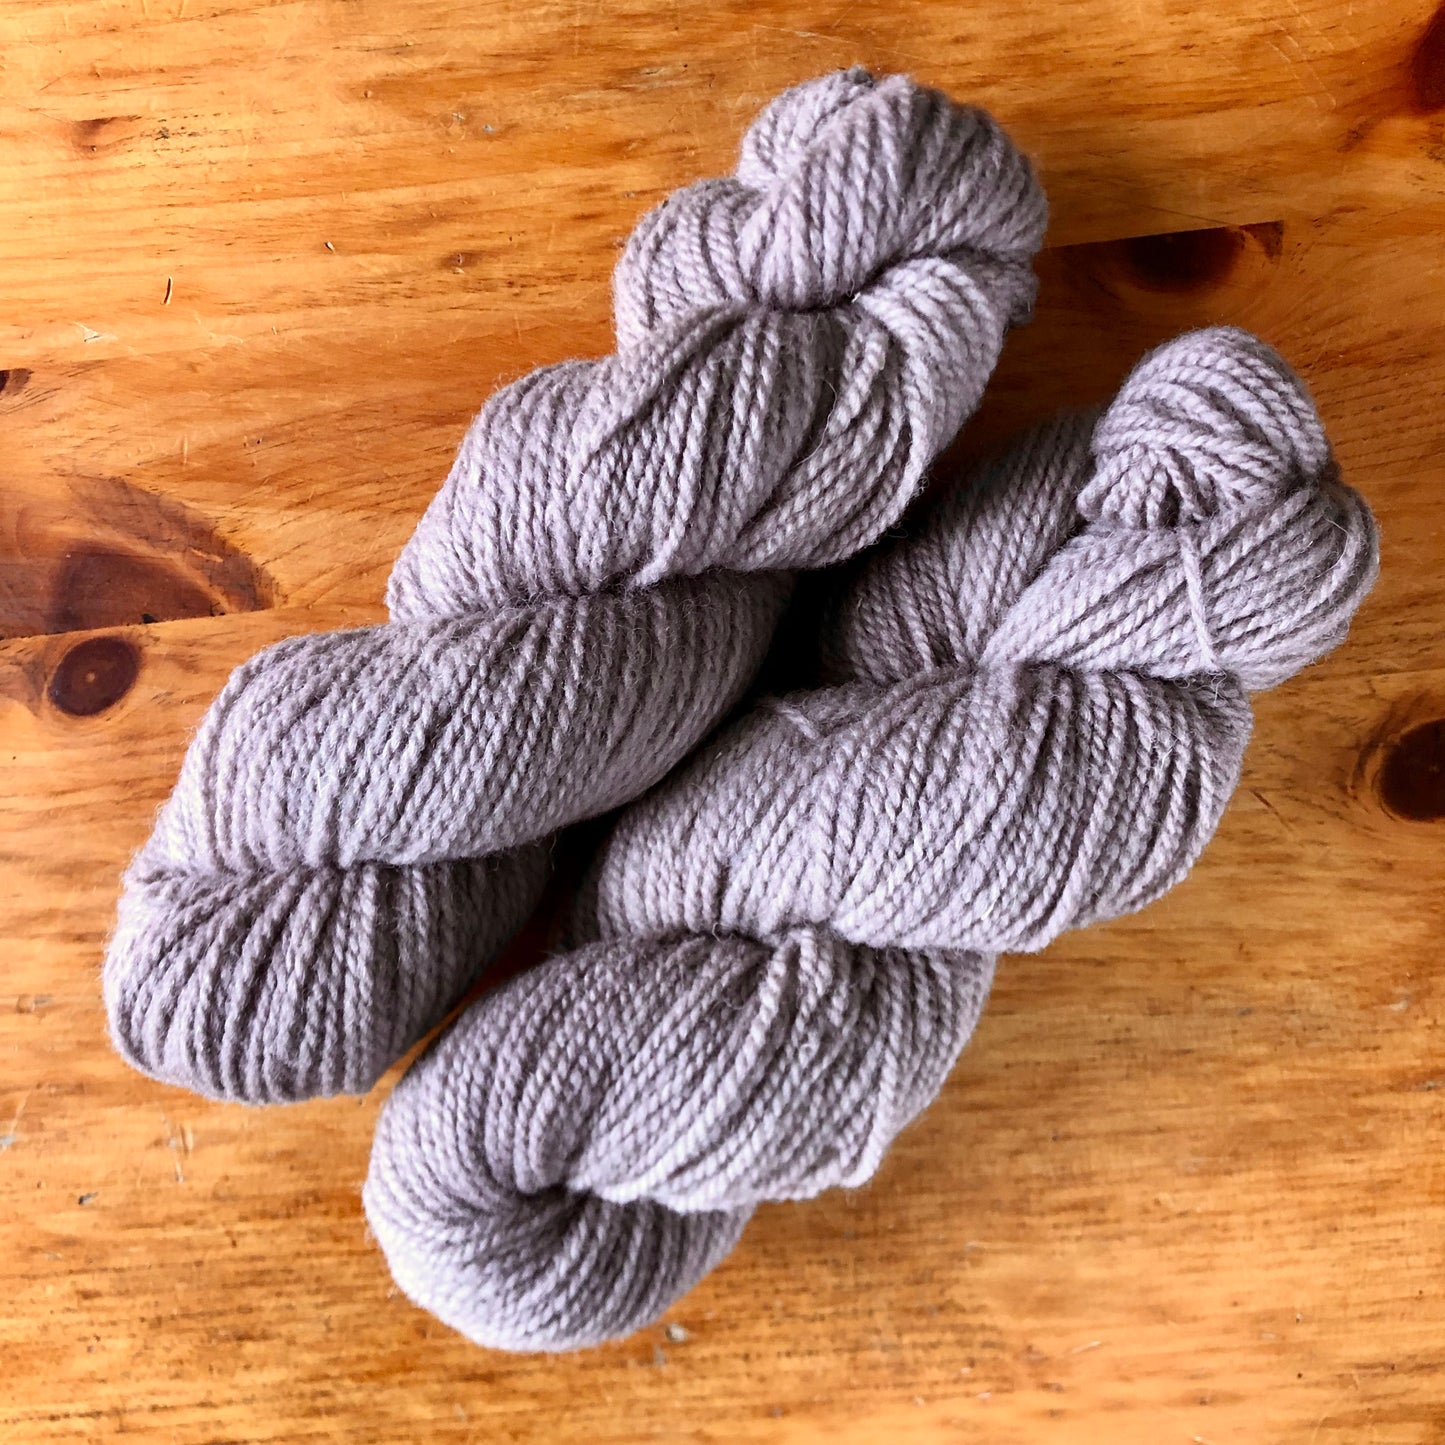 Worsted Weight (4) Yarn, 100% Wool, Hand Dyed "Driftwood" Colourway